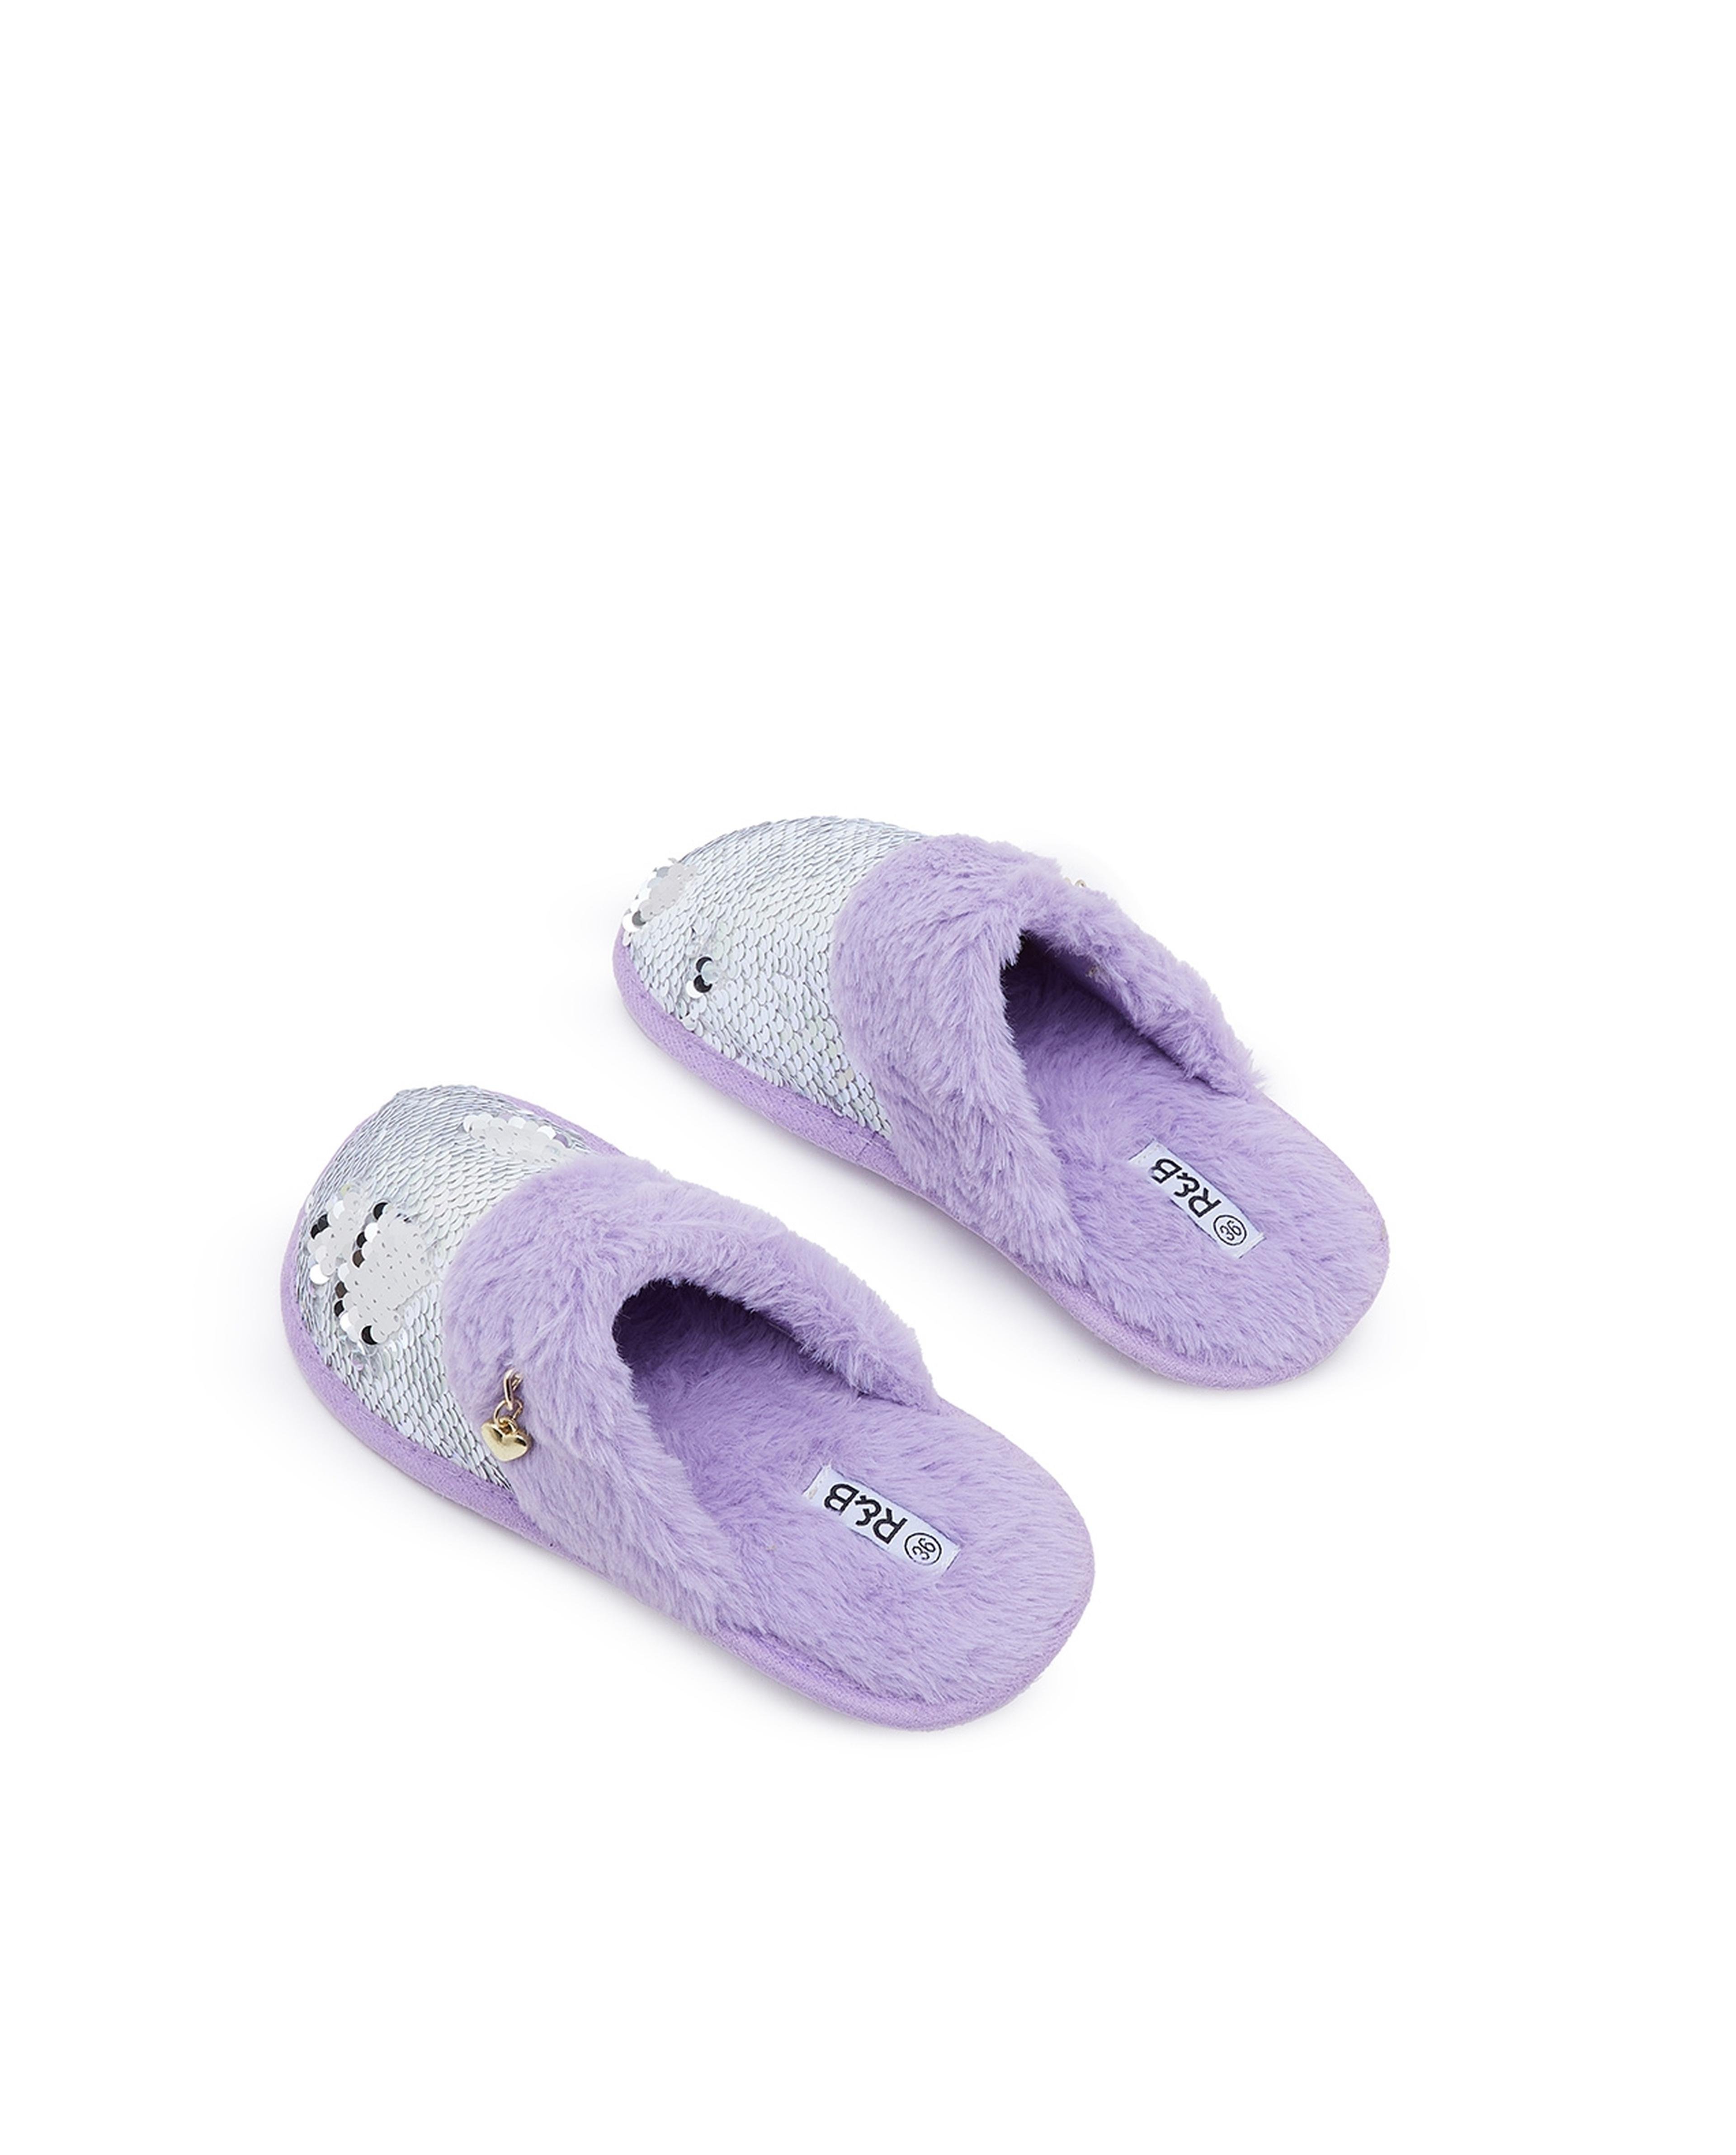 Sequins Plush Bedroom Slippers